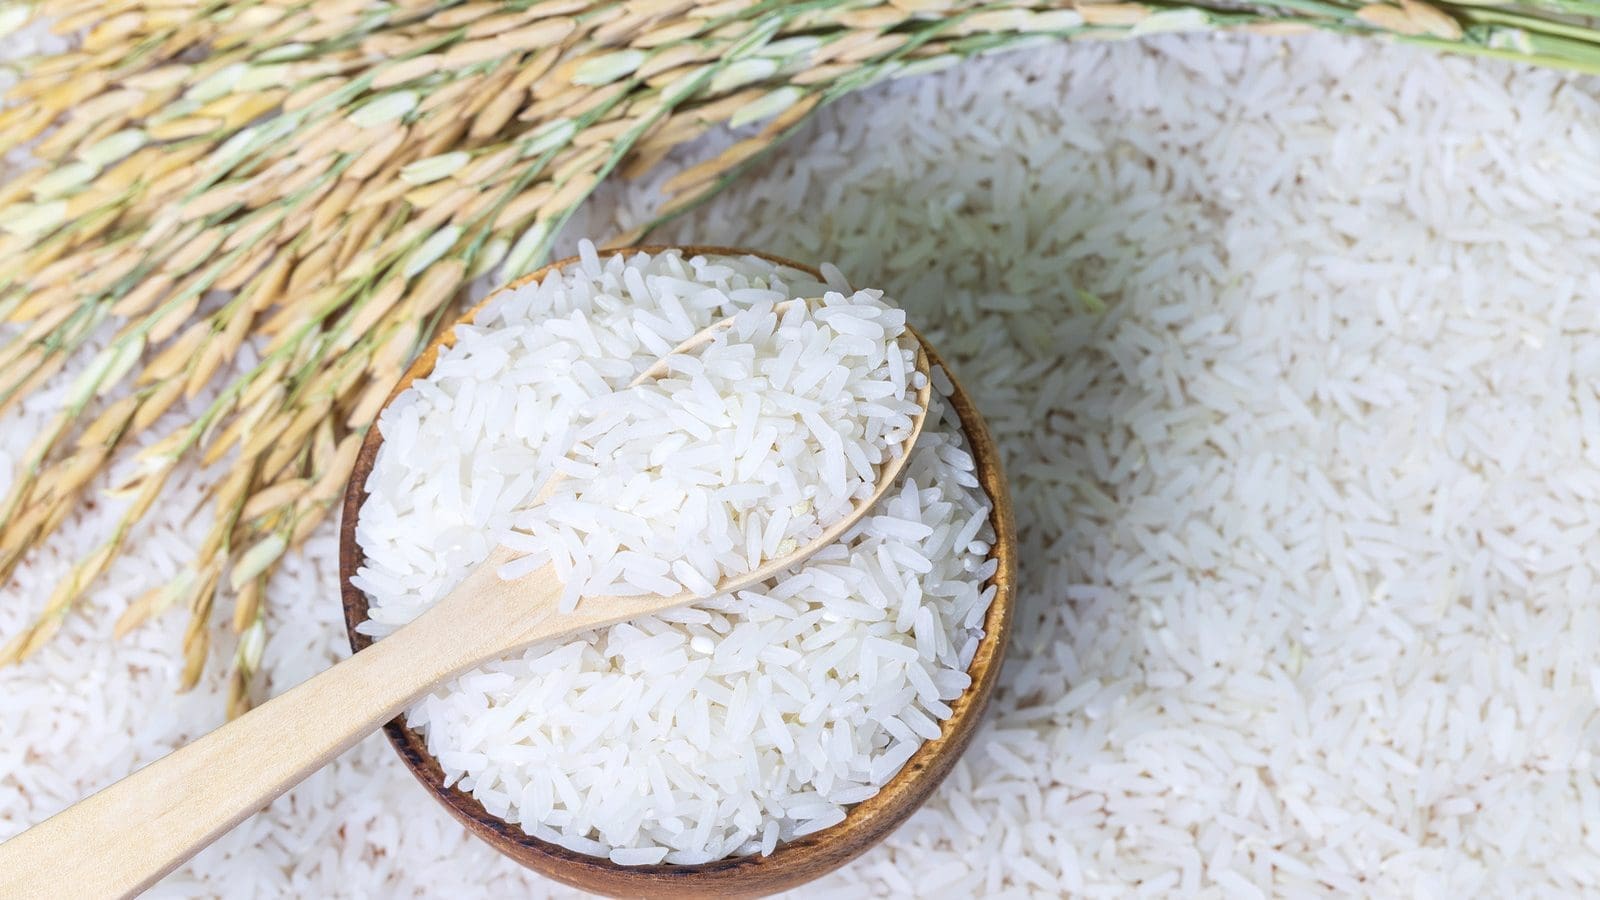 Madagascar requests India to waive export taxes on rice destined for the island